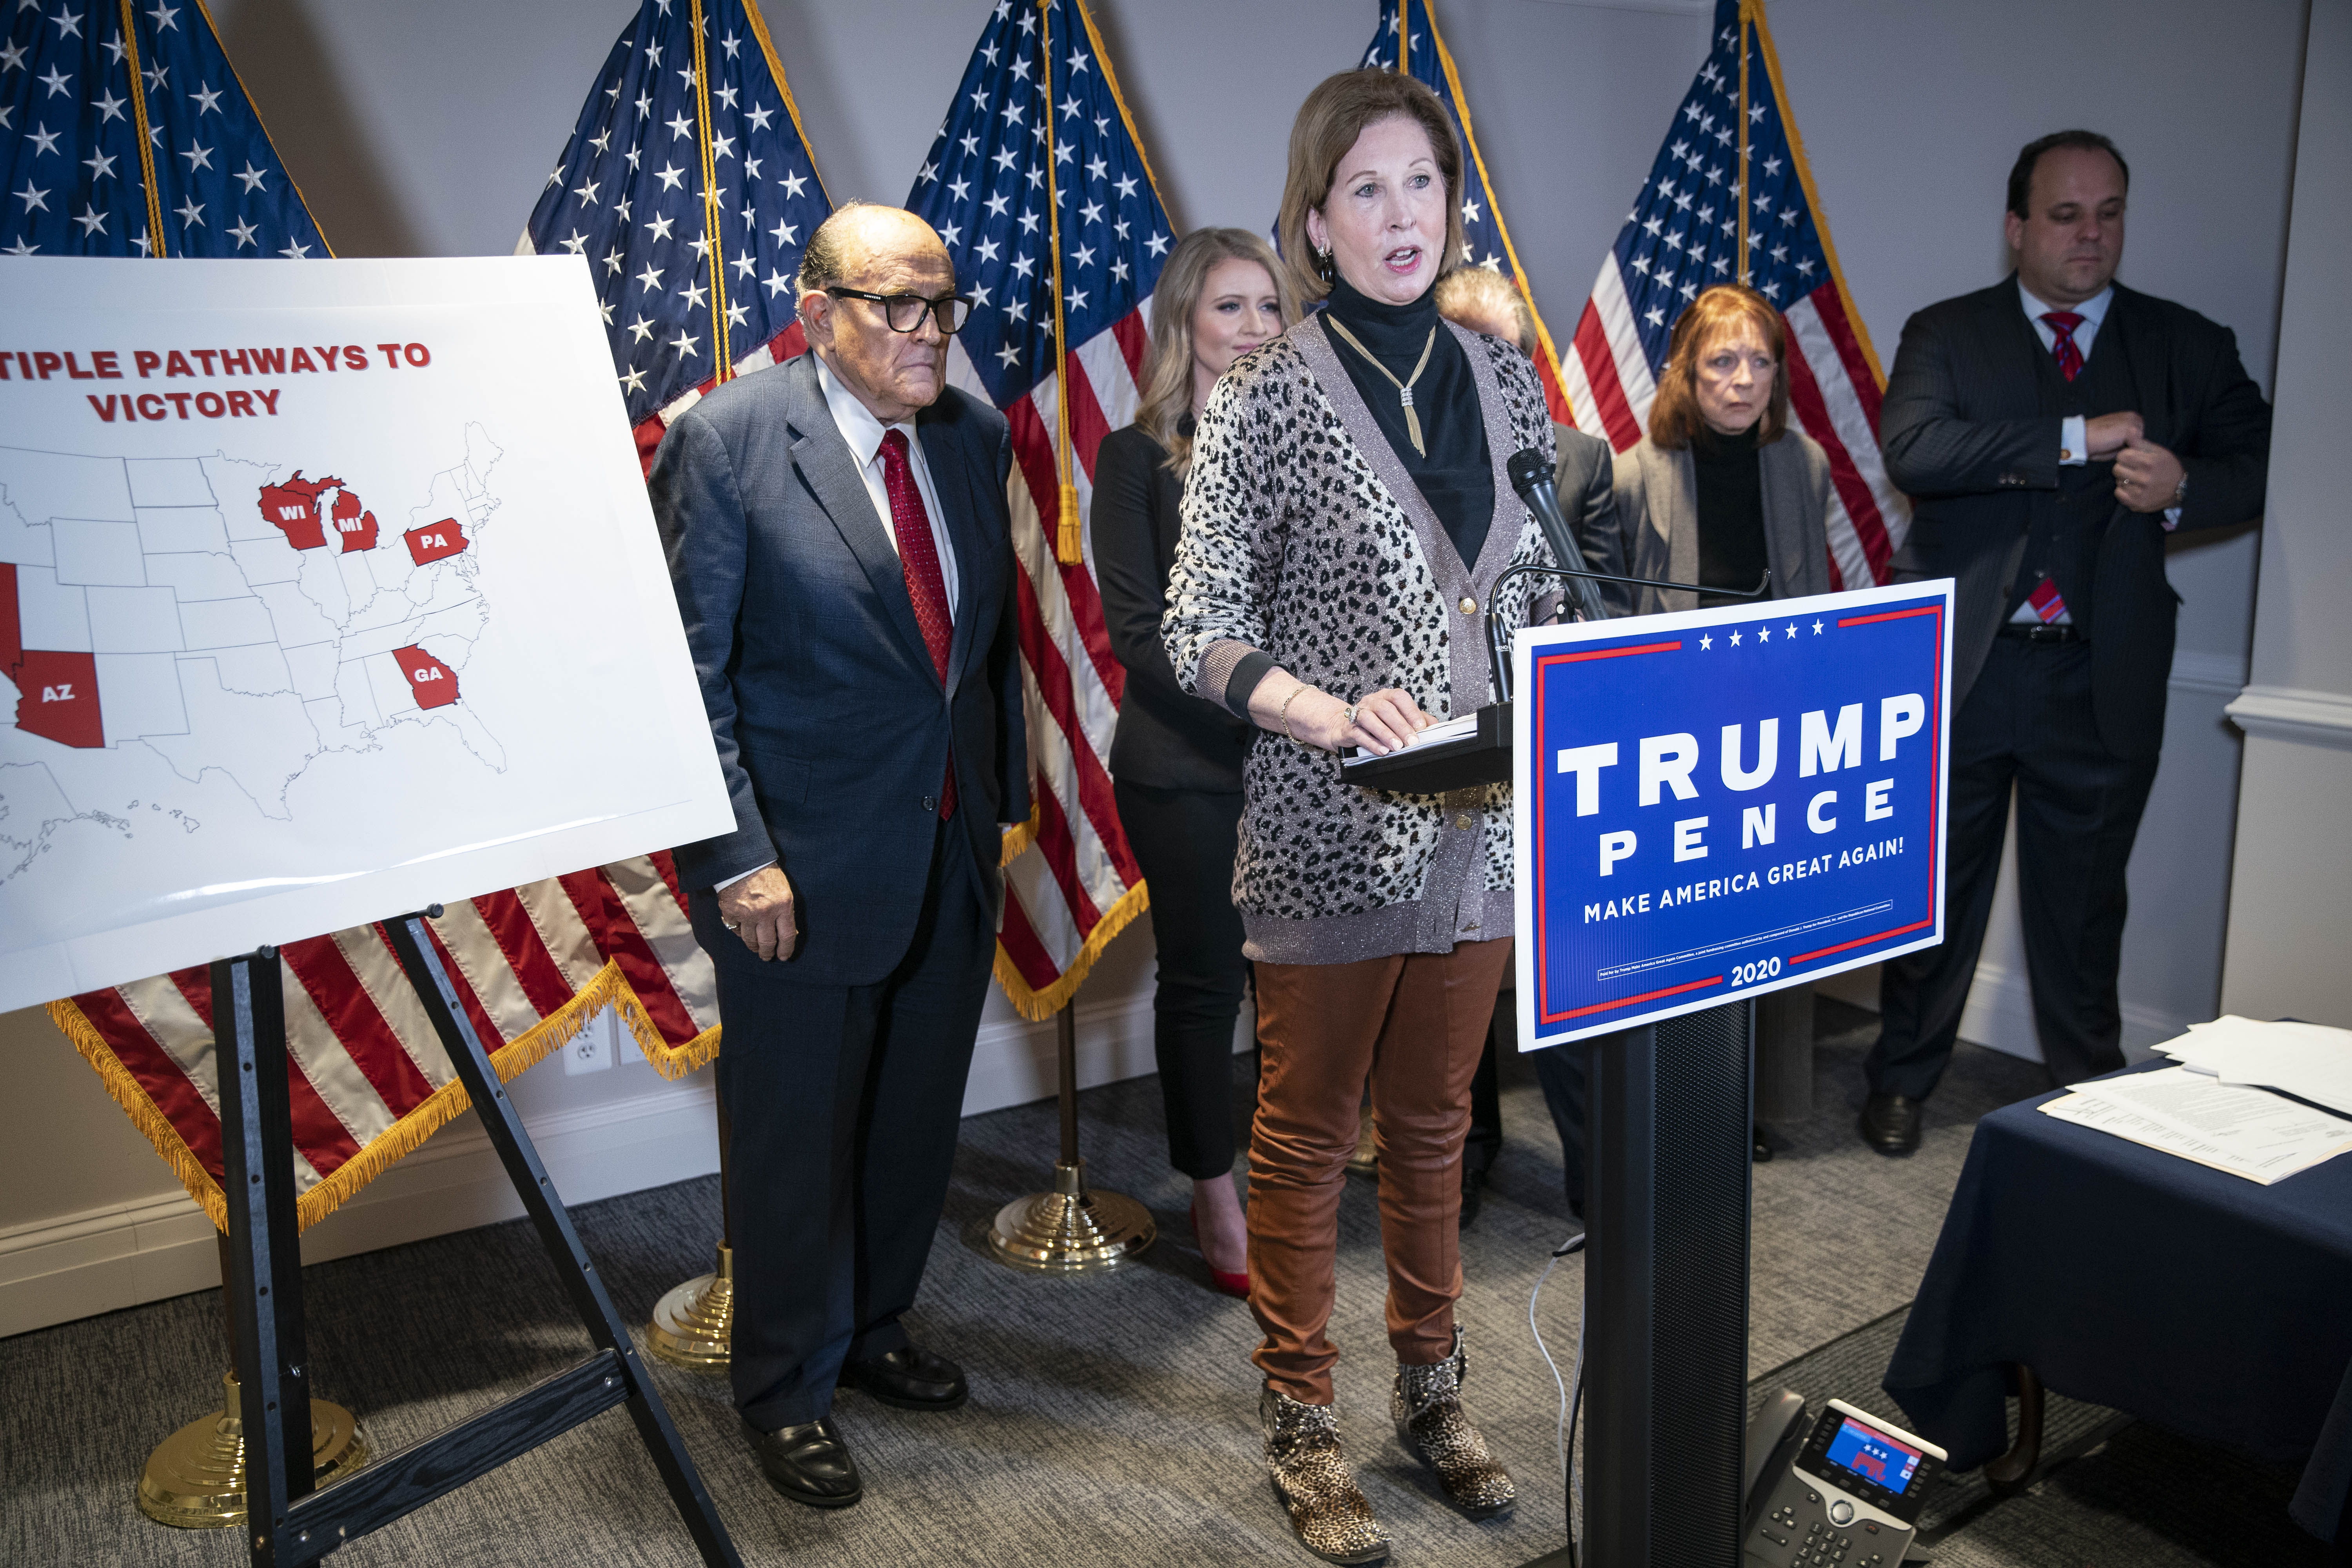 Powell, in a leopard print sweater, black turtleneck, and tan slacks, speaks at a podium with a Trump Pence sign. Behind her are a row of US flags and Rudy Giuliani in a dark suit and red tie.